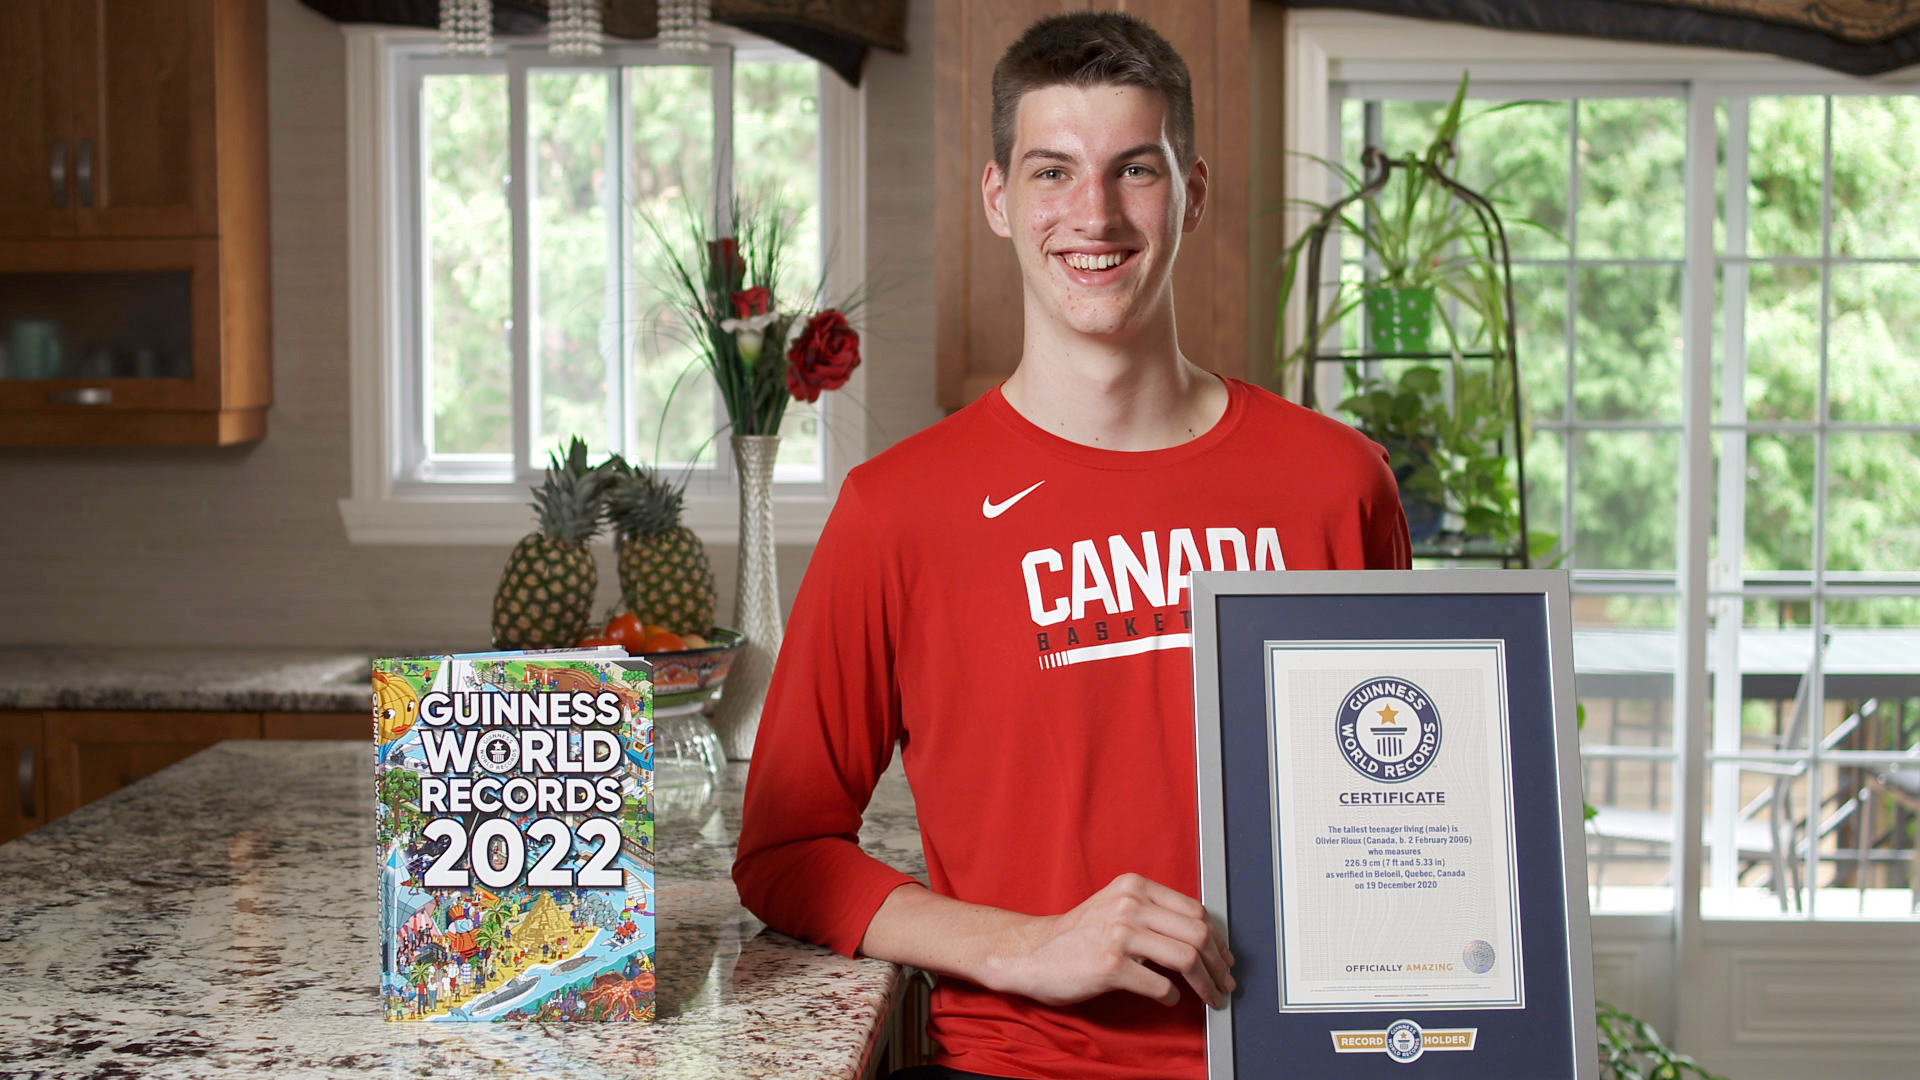 Meet the tallest teen in the world. He's 15, from Montreal and is 7-foot-5